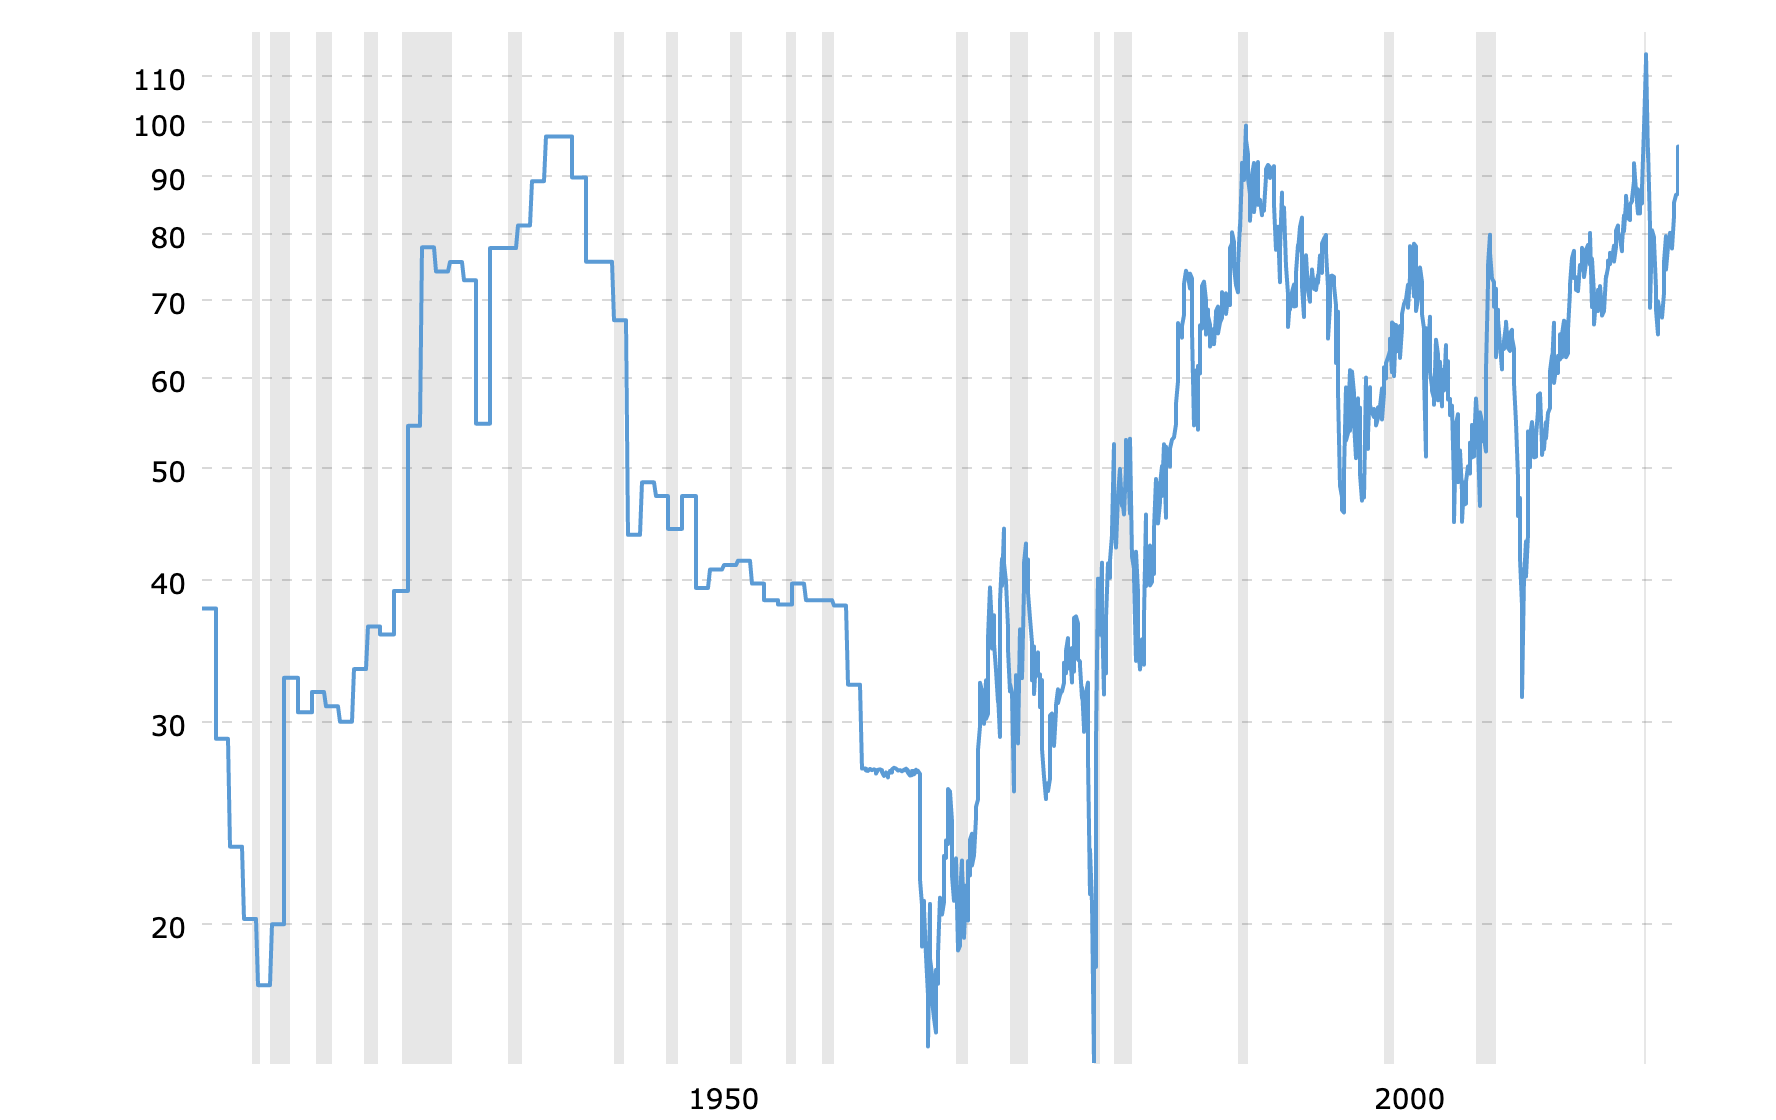 Gold-Silver Ratio Hits 10-Year High - Precious Metals Supply And